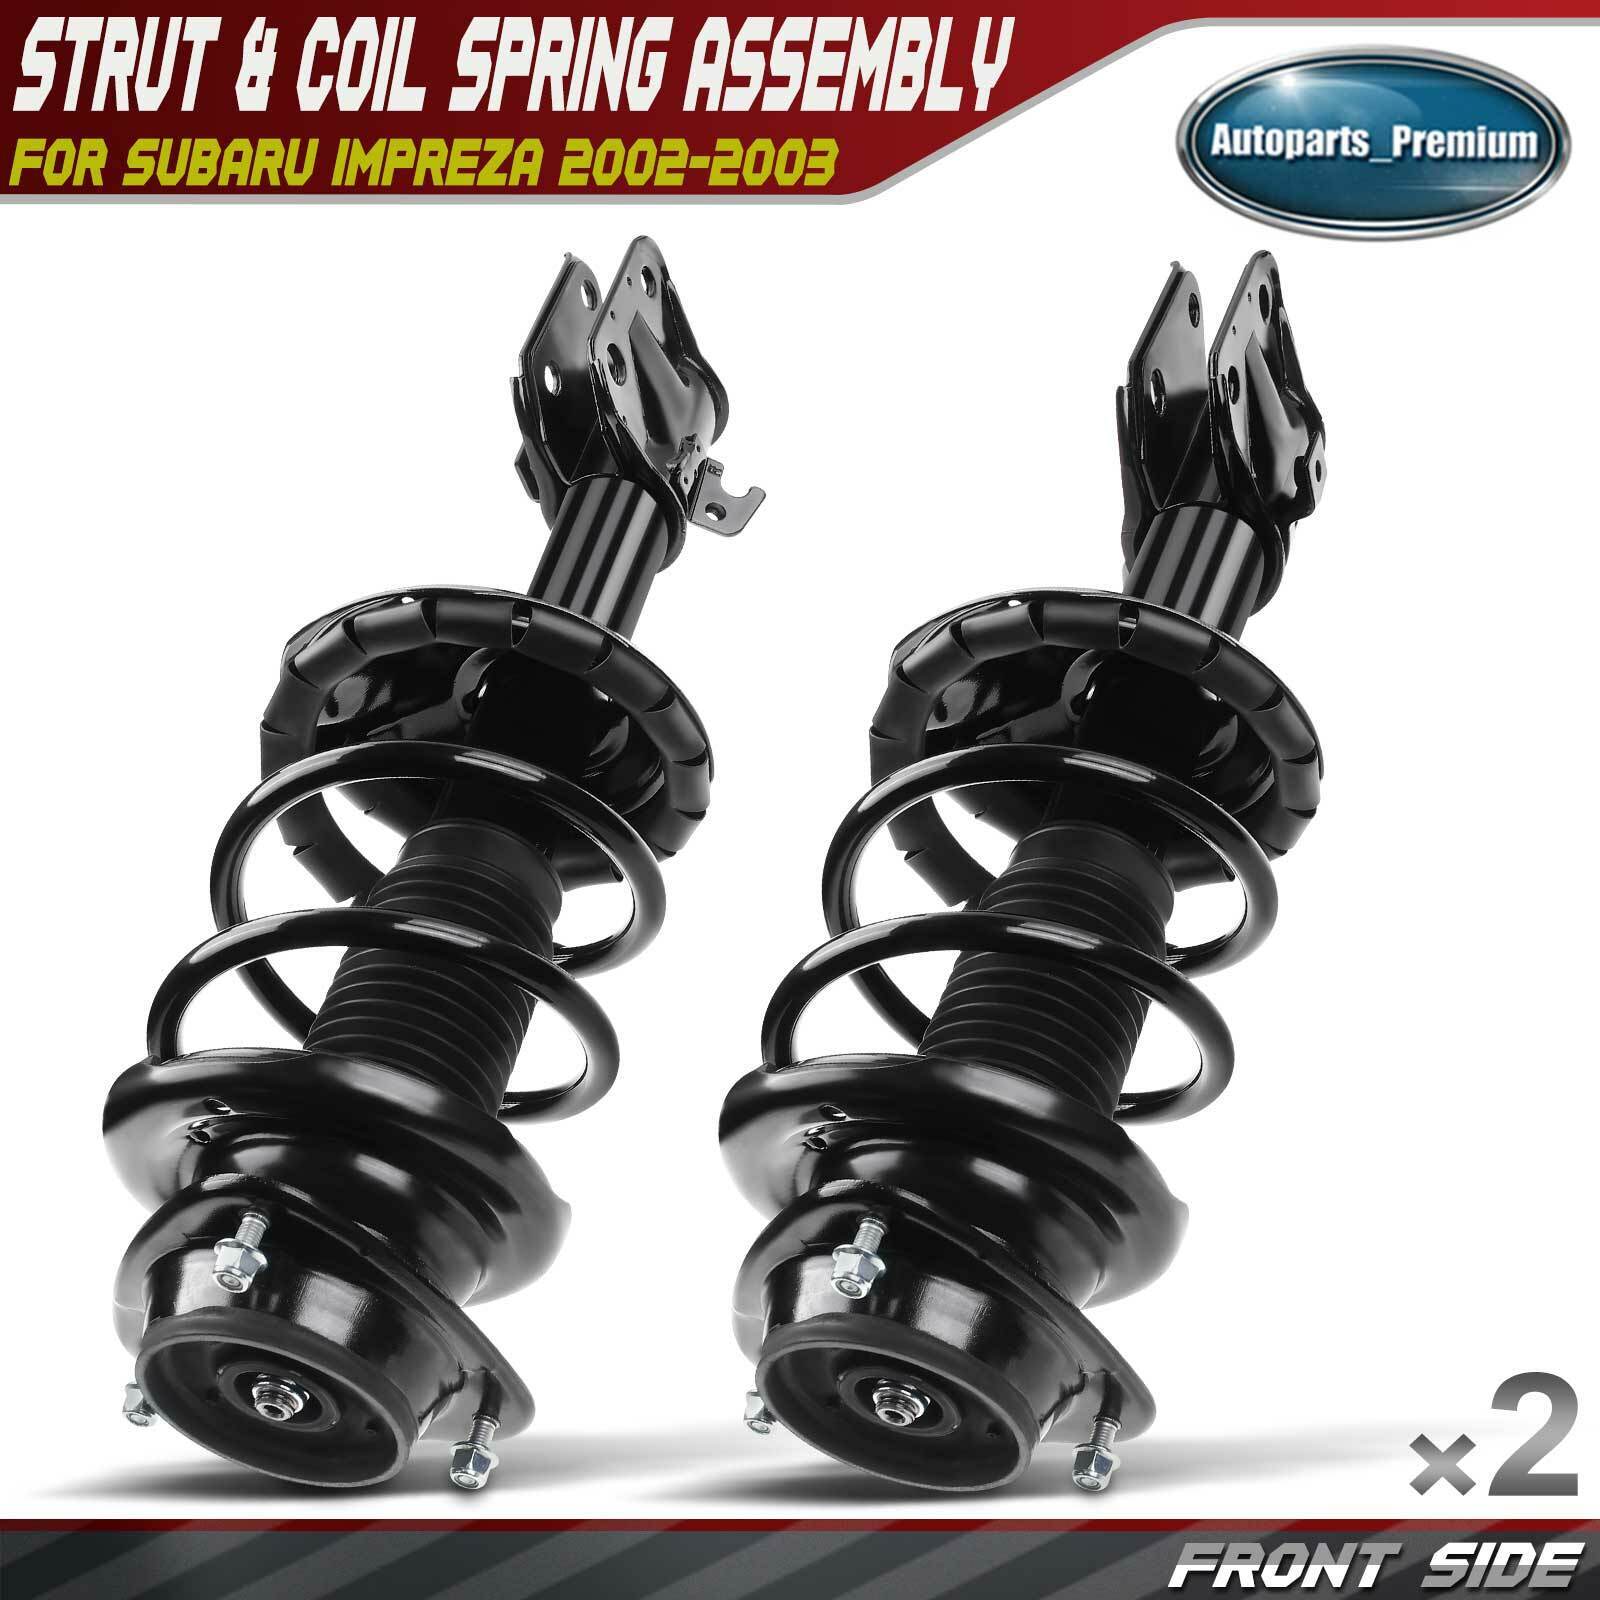 2x Front Complete Strut & Coil Spring Assembly for Subaru Impreza RS WRX 02-03